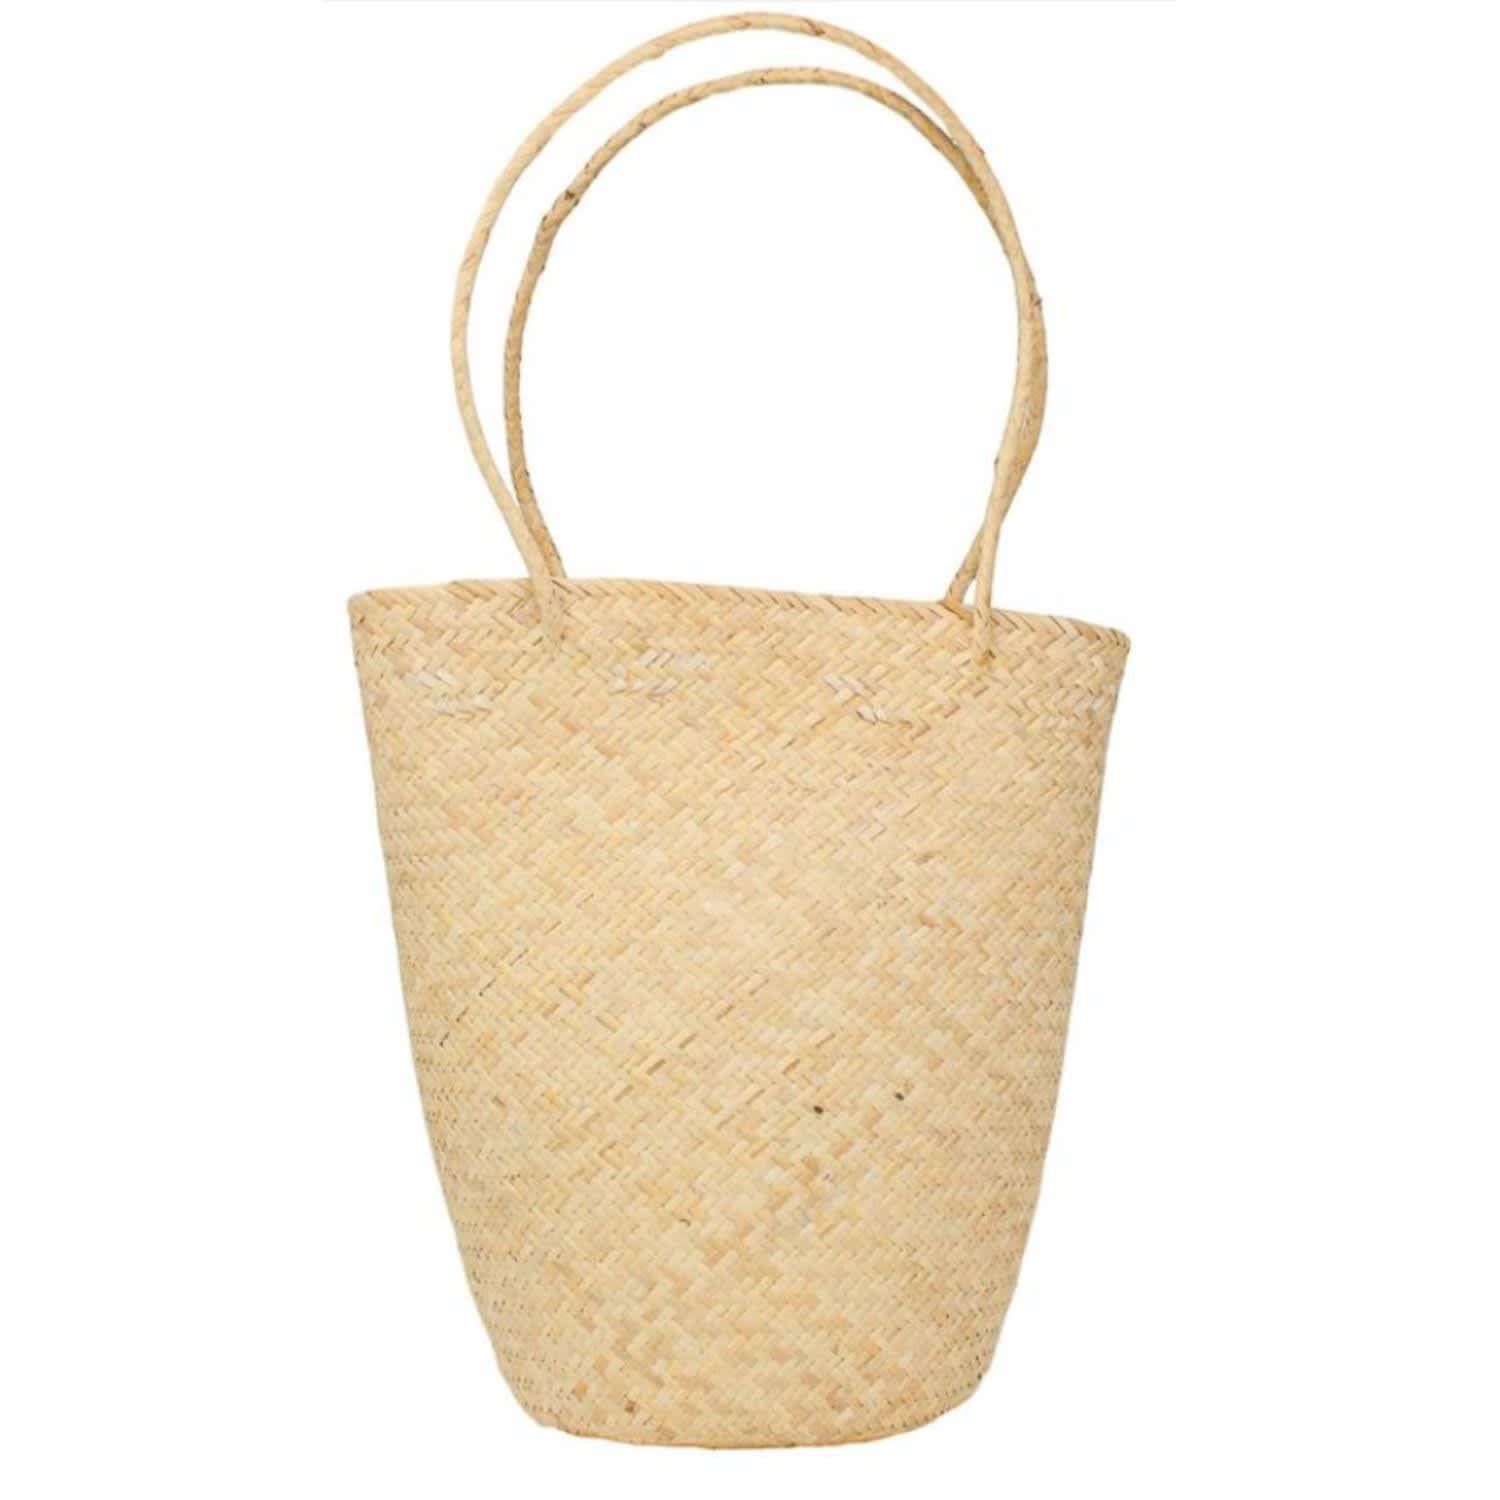 Charlotte Straw Tote - Round | Wolf and Badger (Global excl. US)